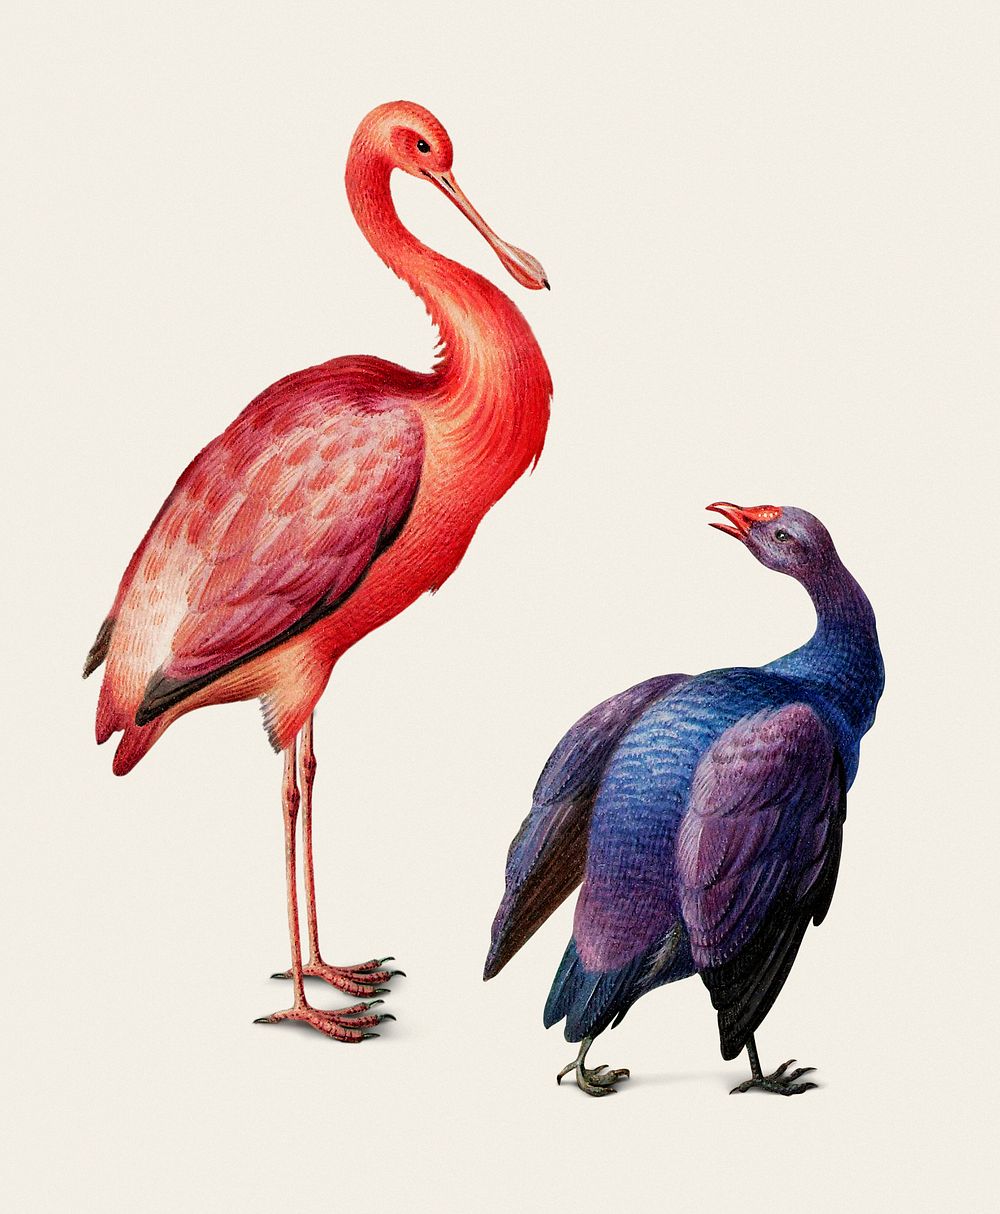 Vintage illustration of a roseate spoonbill and a swamphen